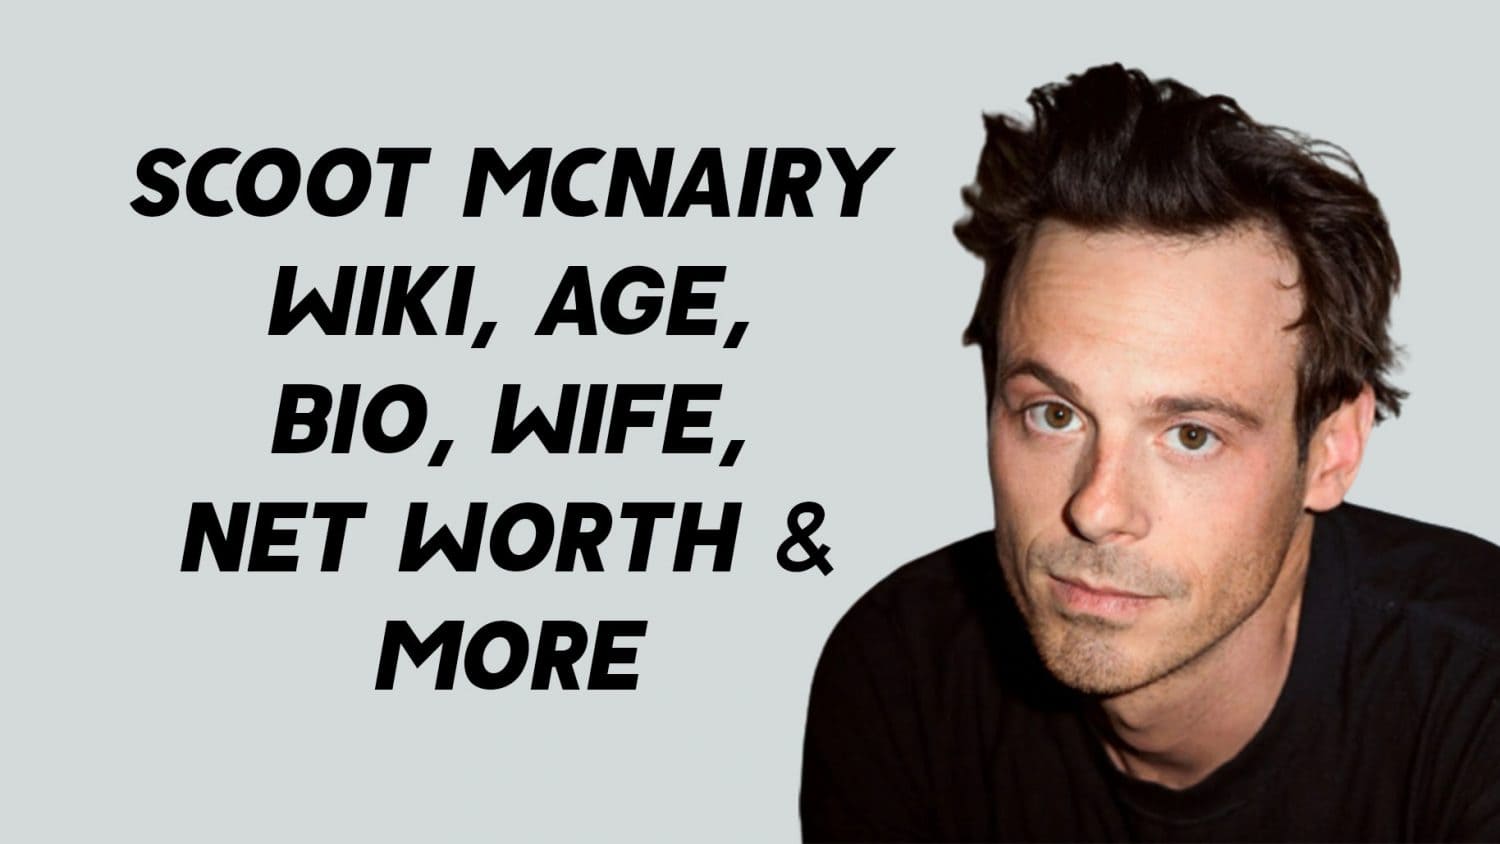 Scoot McNairy Wiki, Age, Bio, Wife, Net Worth & More 1